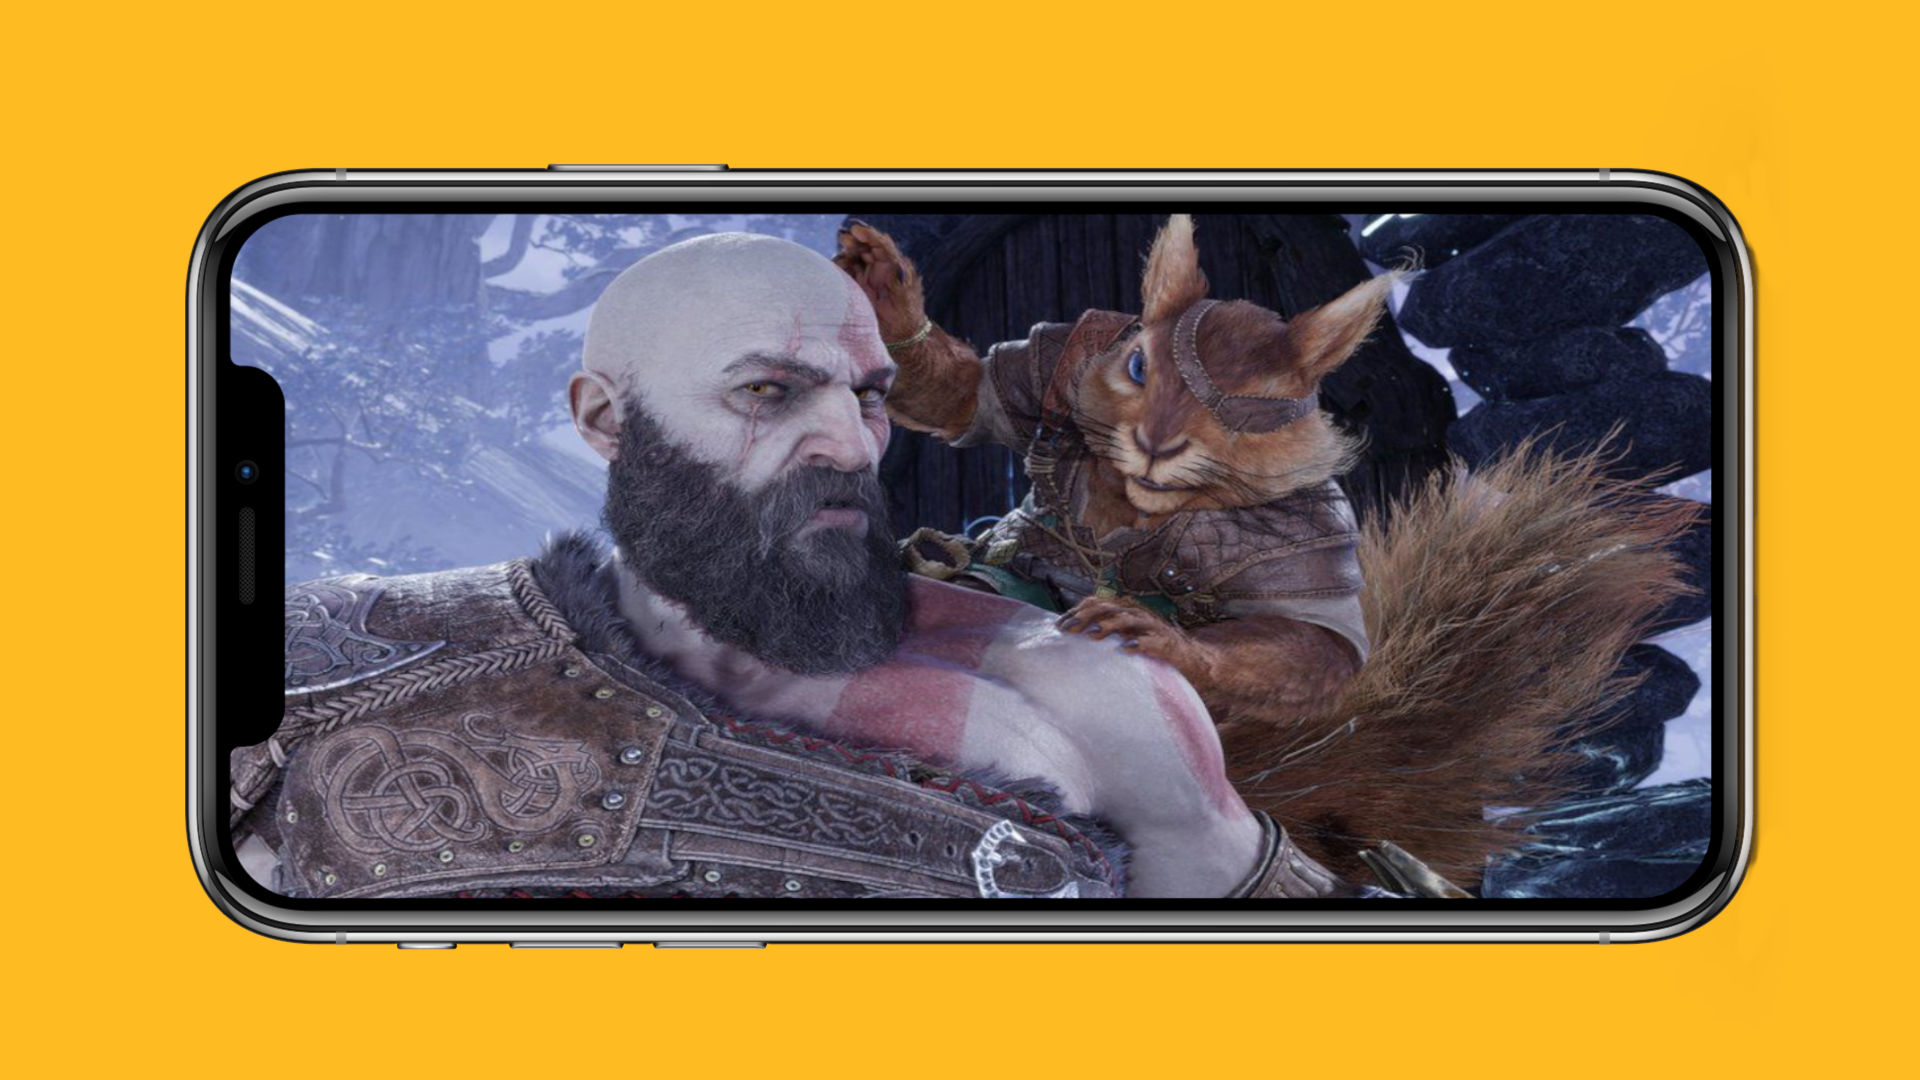 What Do You Need to Play God of War on PC?